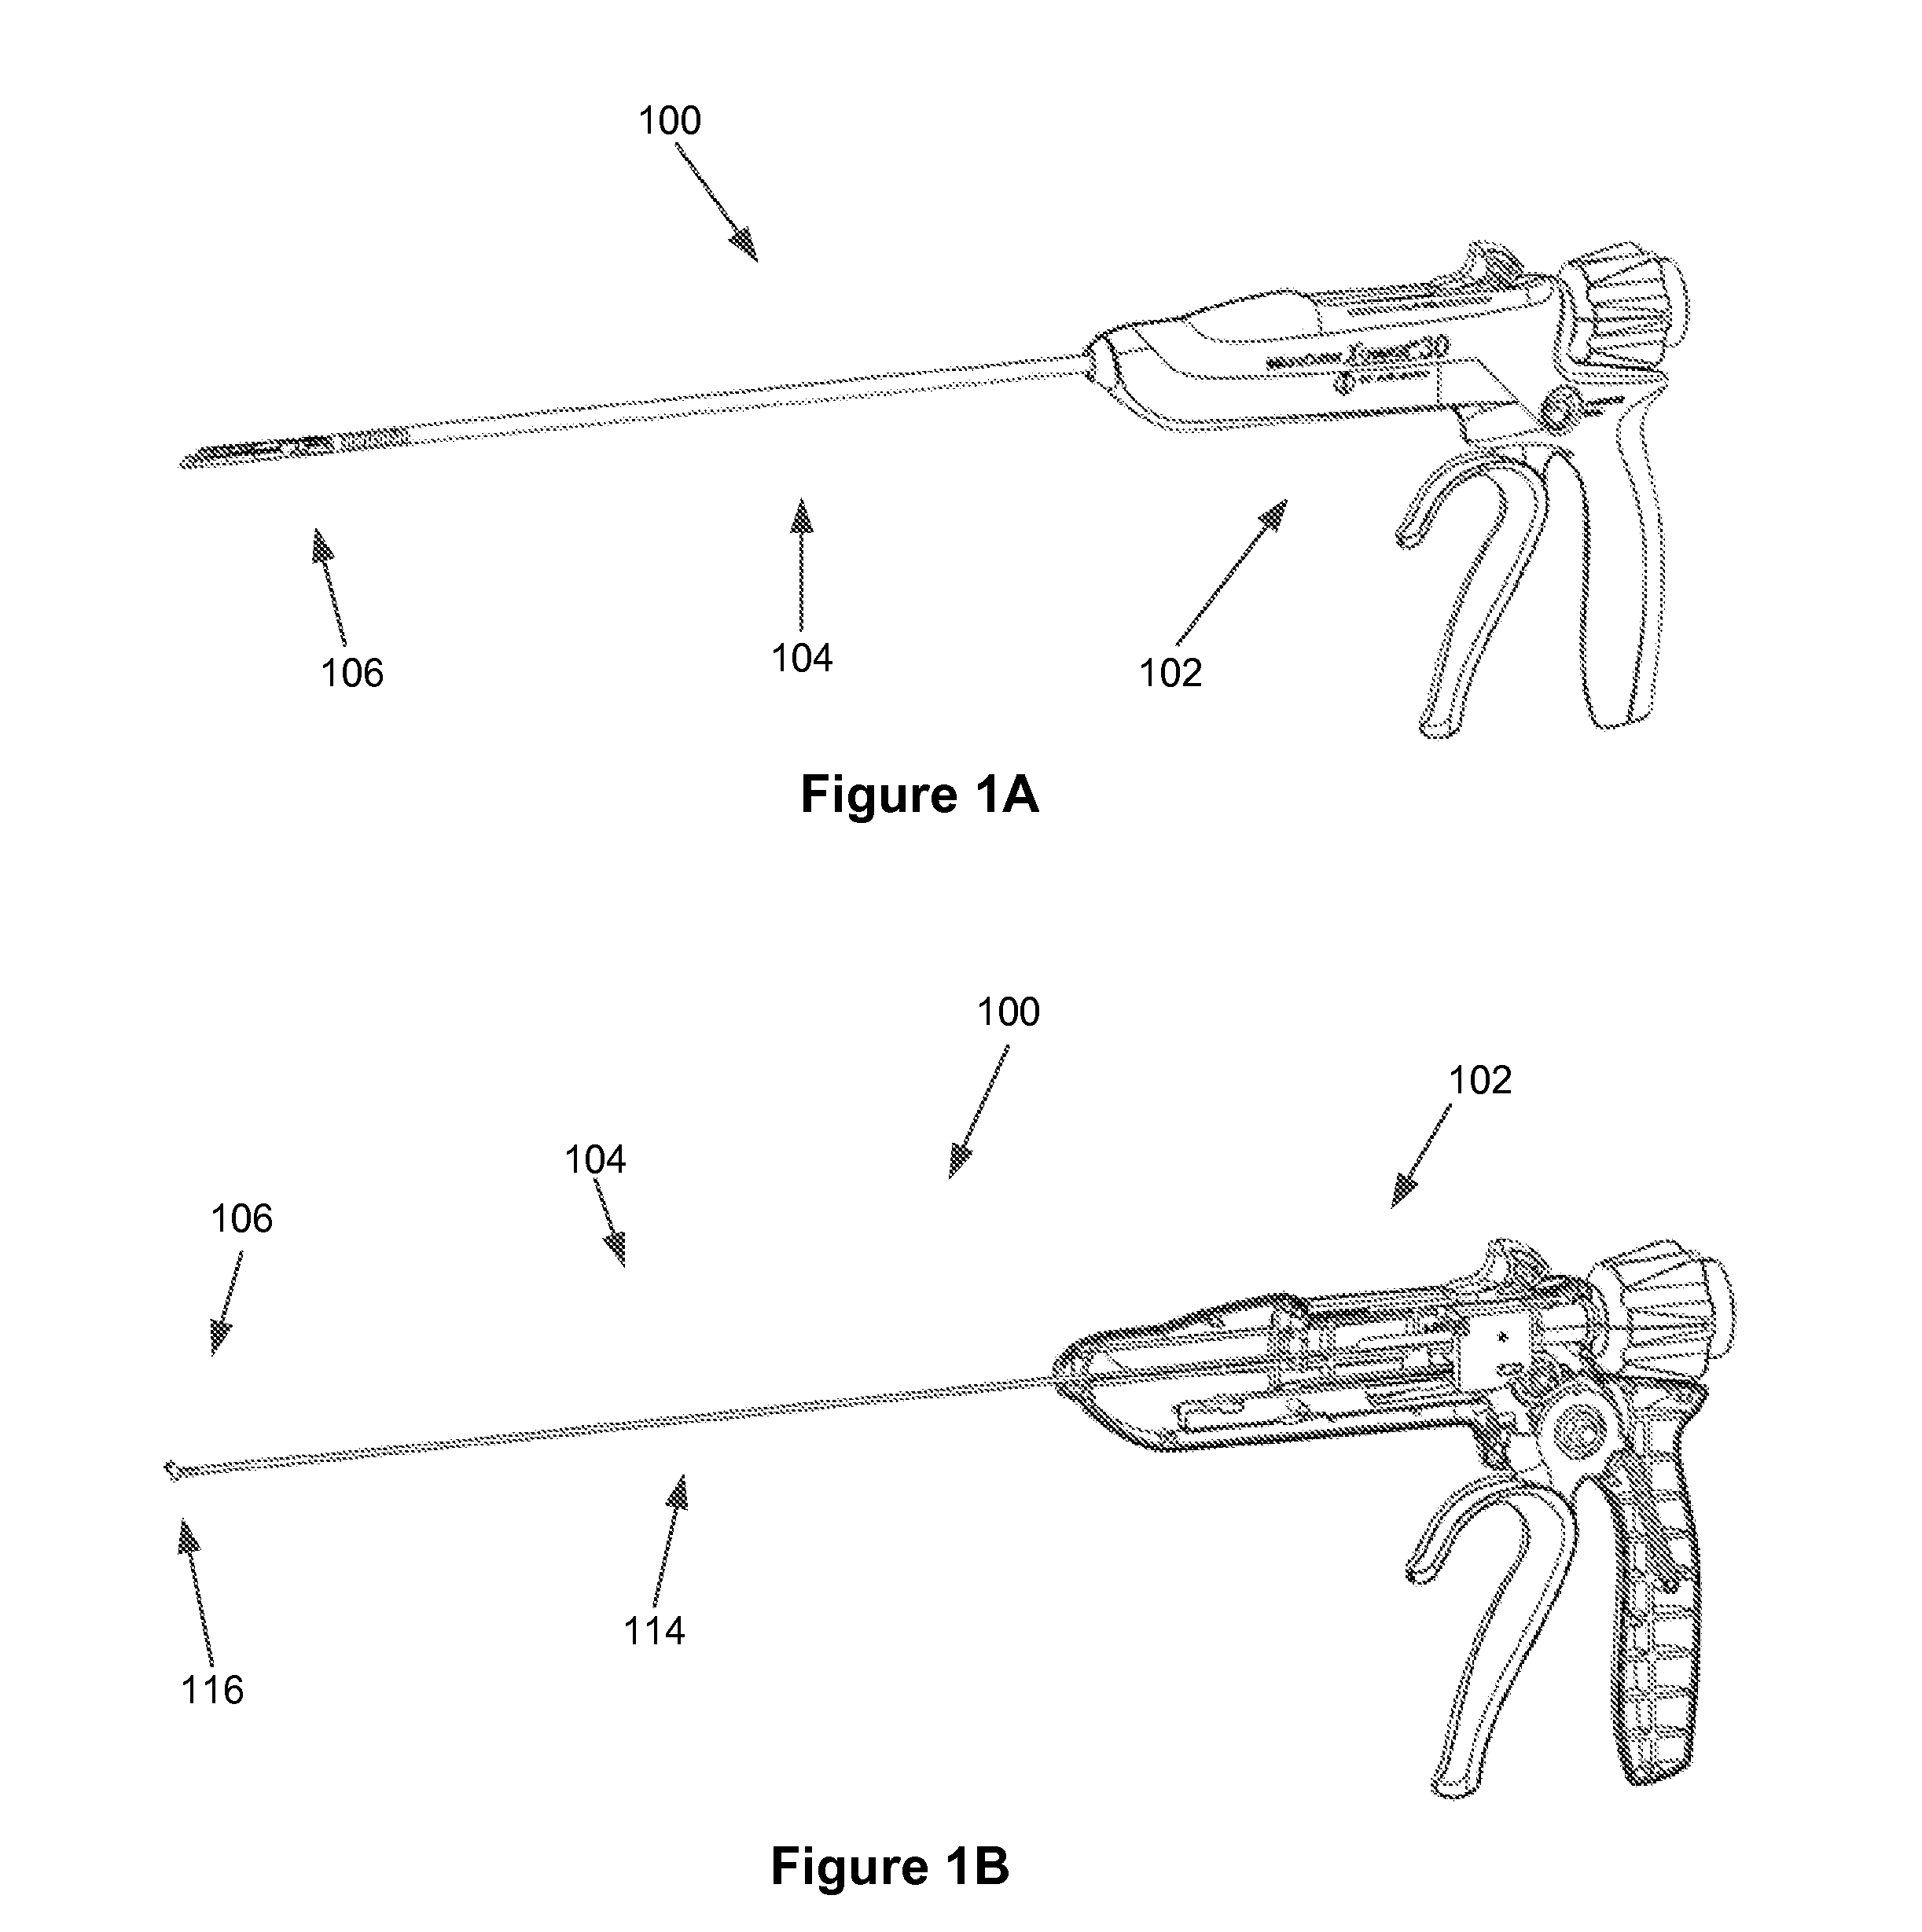 Surgical stapling and cutting apparatus - deployment mechanisms, systems and methods